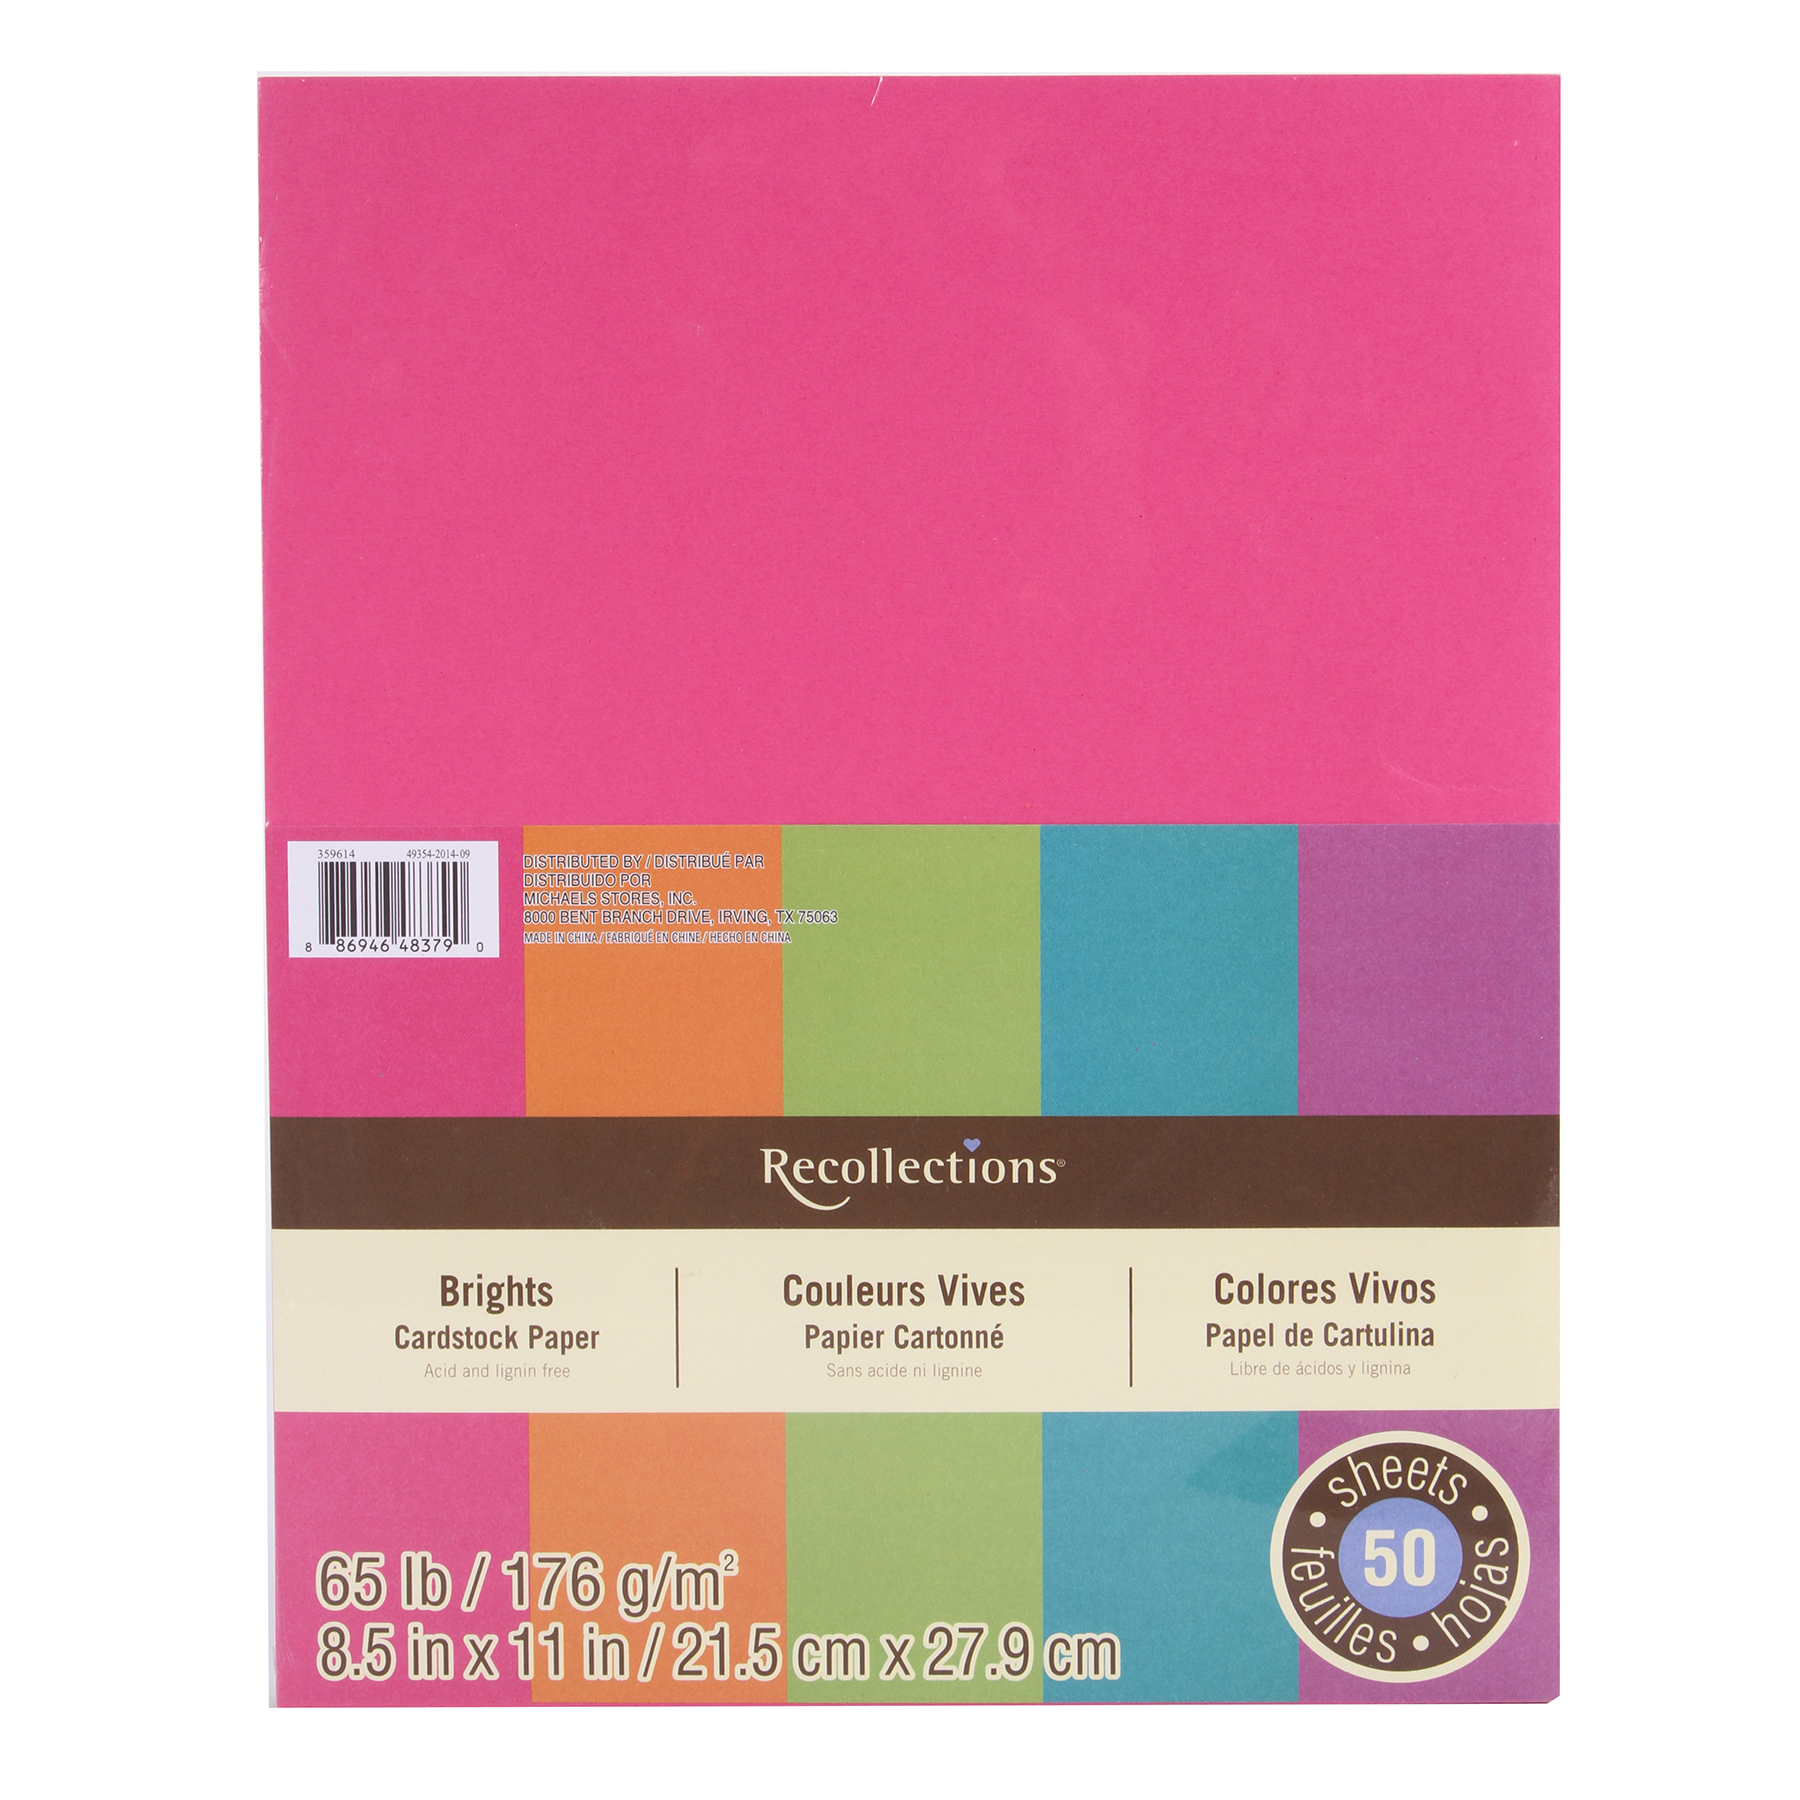 Find The Brights Cardstock Paper By Recollections® At Michaels